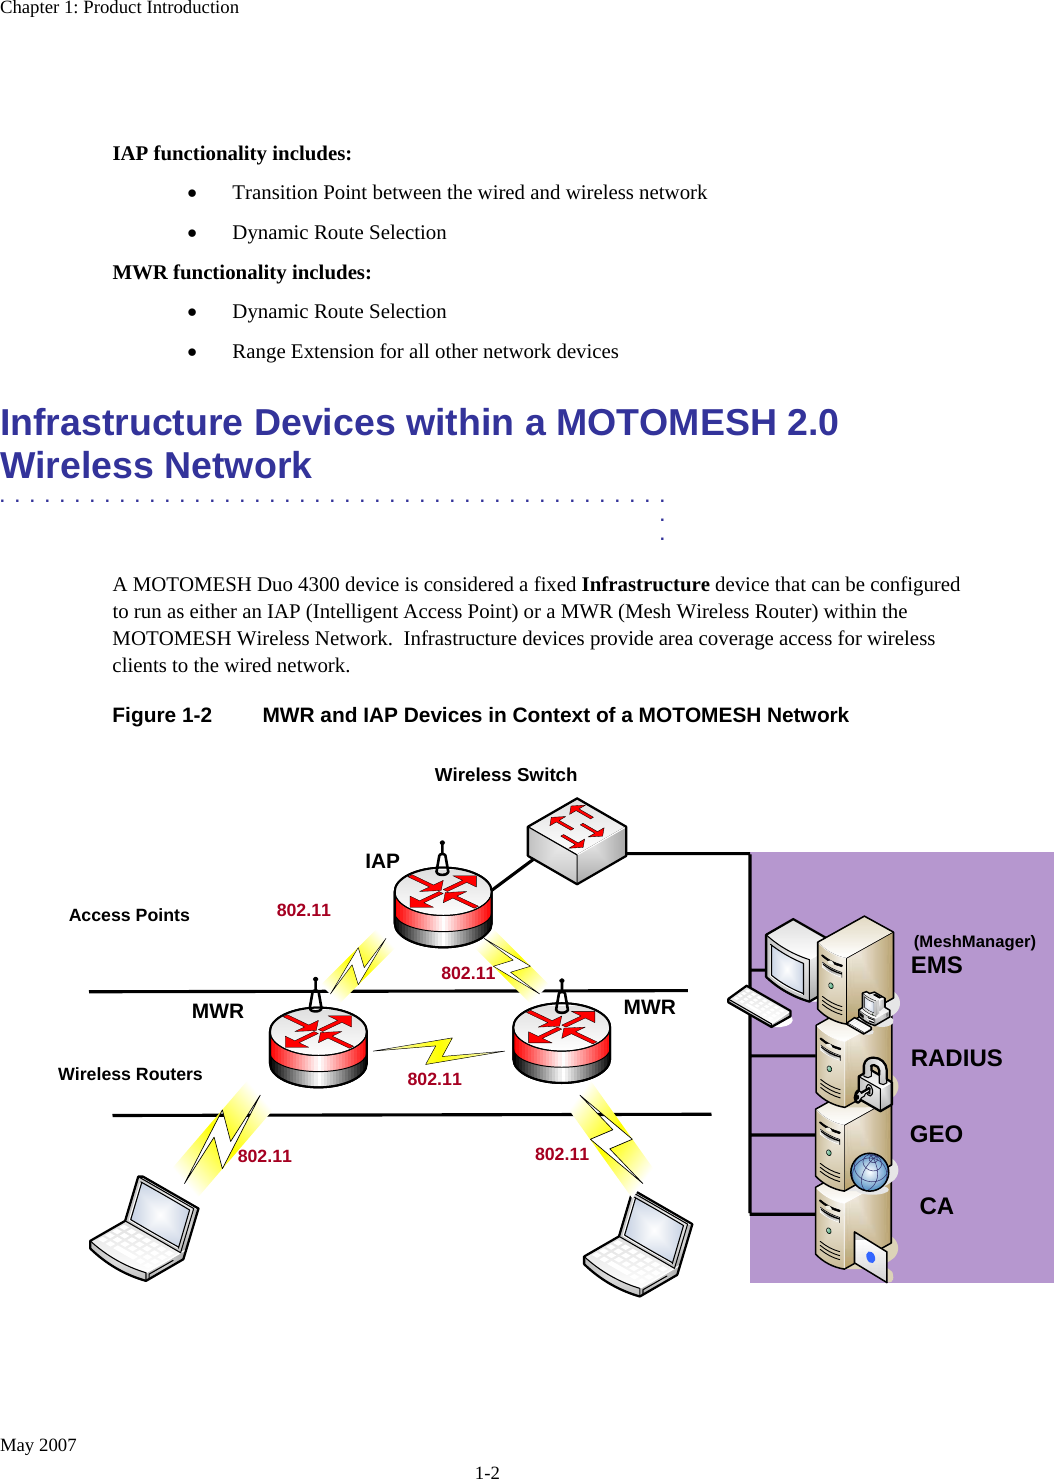 Chapter 1: Product Introduction May 2007 1-2   IAP functionality includes: • Transition Point between the wired and wireless network • Dynamic Route Selection MWR functionality includes: • Dynamic Route Selection • Range Extension for all other network devices Infrastructure Devices within a MOTOMESH 2.0 Wireless Network .............................................  .  . A MOTOMESH Duo 4300 device is considered a fixed Infrastructure device that can be configured to run as either an IAP (Intelligent Access Point) or a MWR (Mesh Wireless Router) within the MOTOMESH Wireless Network.  Infrastructure devices provide area coverage access for wireless clients to the wired network.  Figure 1-2  MWR and IAP Devices in Context of a MOTOMESH Network  Wireless   802.11 802.11 802.11 802.11 EMS CA GEORADIUSIAP MWR  MWR 802.11 Access Points Wireless Routers (MeshManager)Wireless Switch 